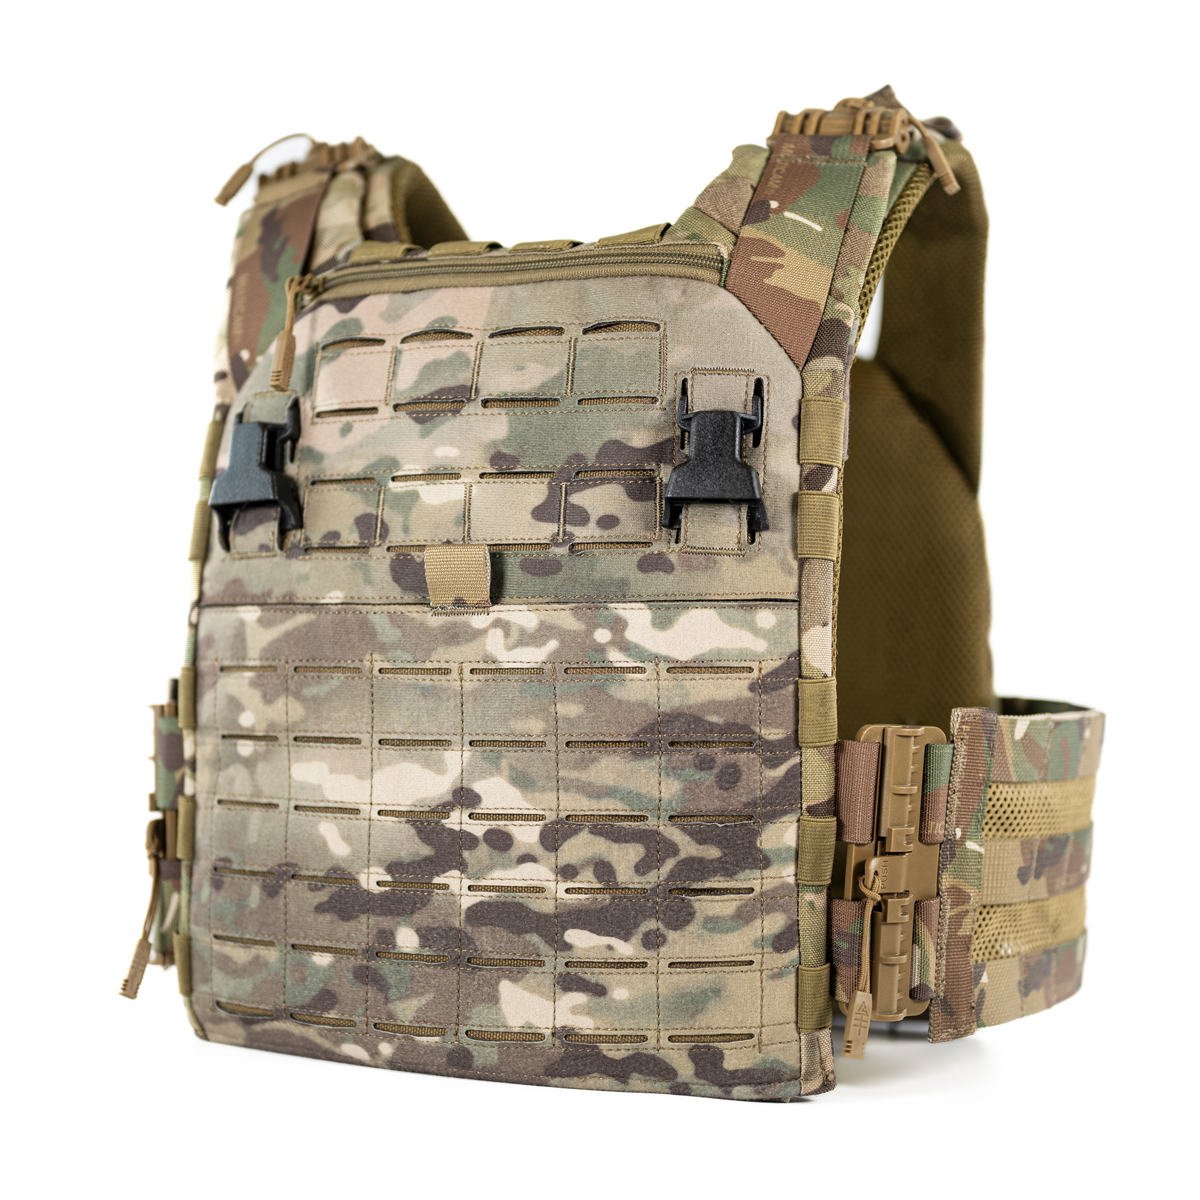 Sierra Plate Carrier by 0331 Tactical